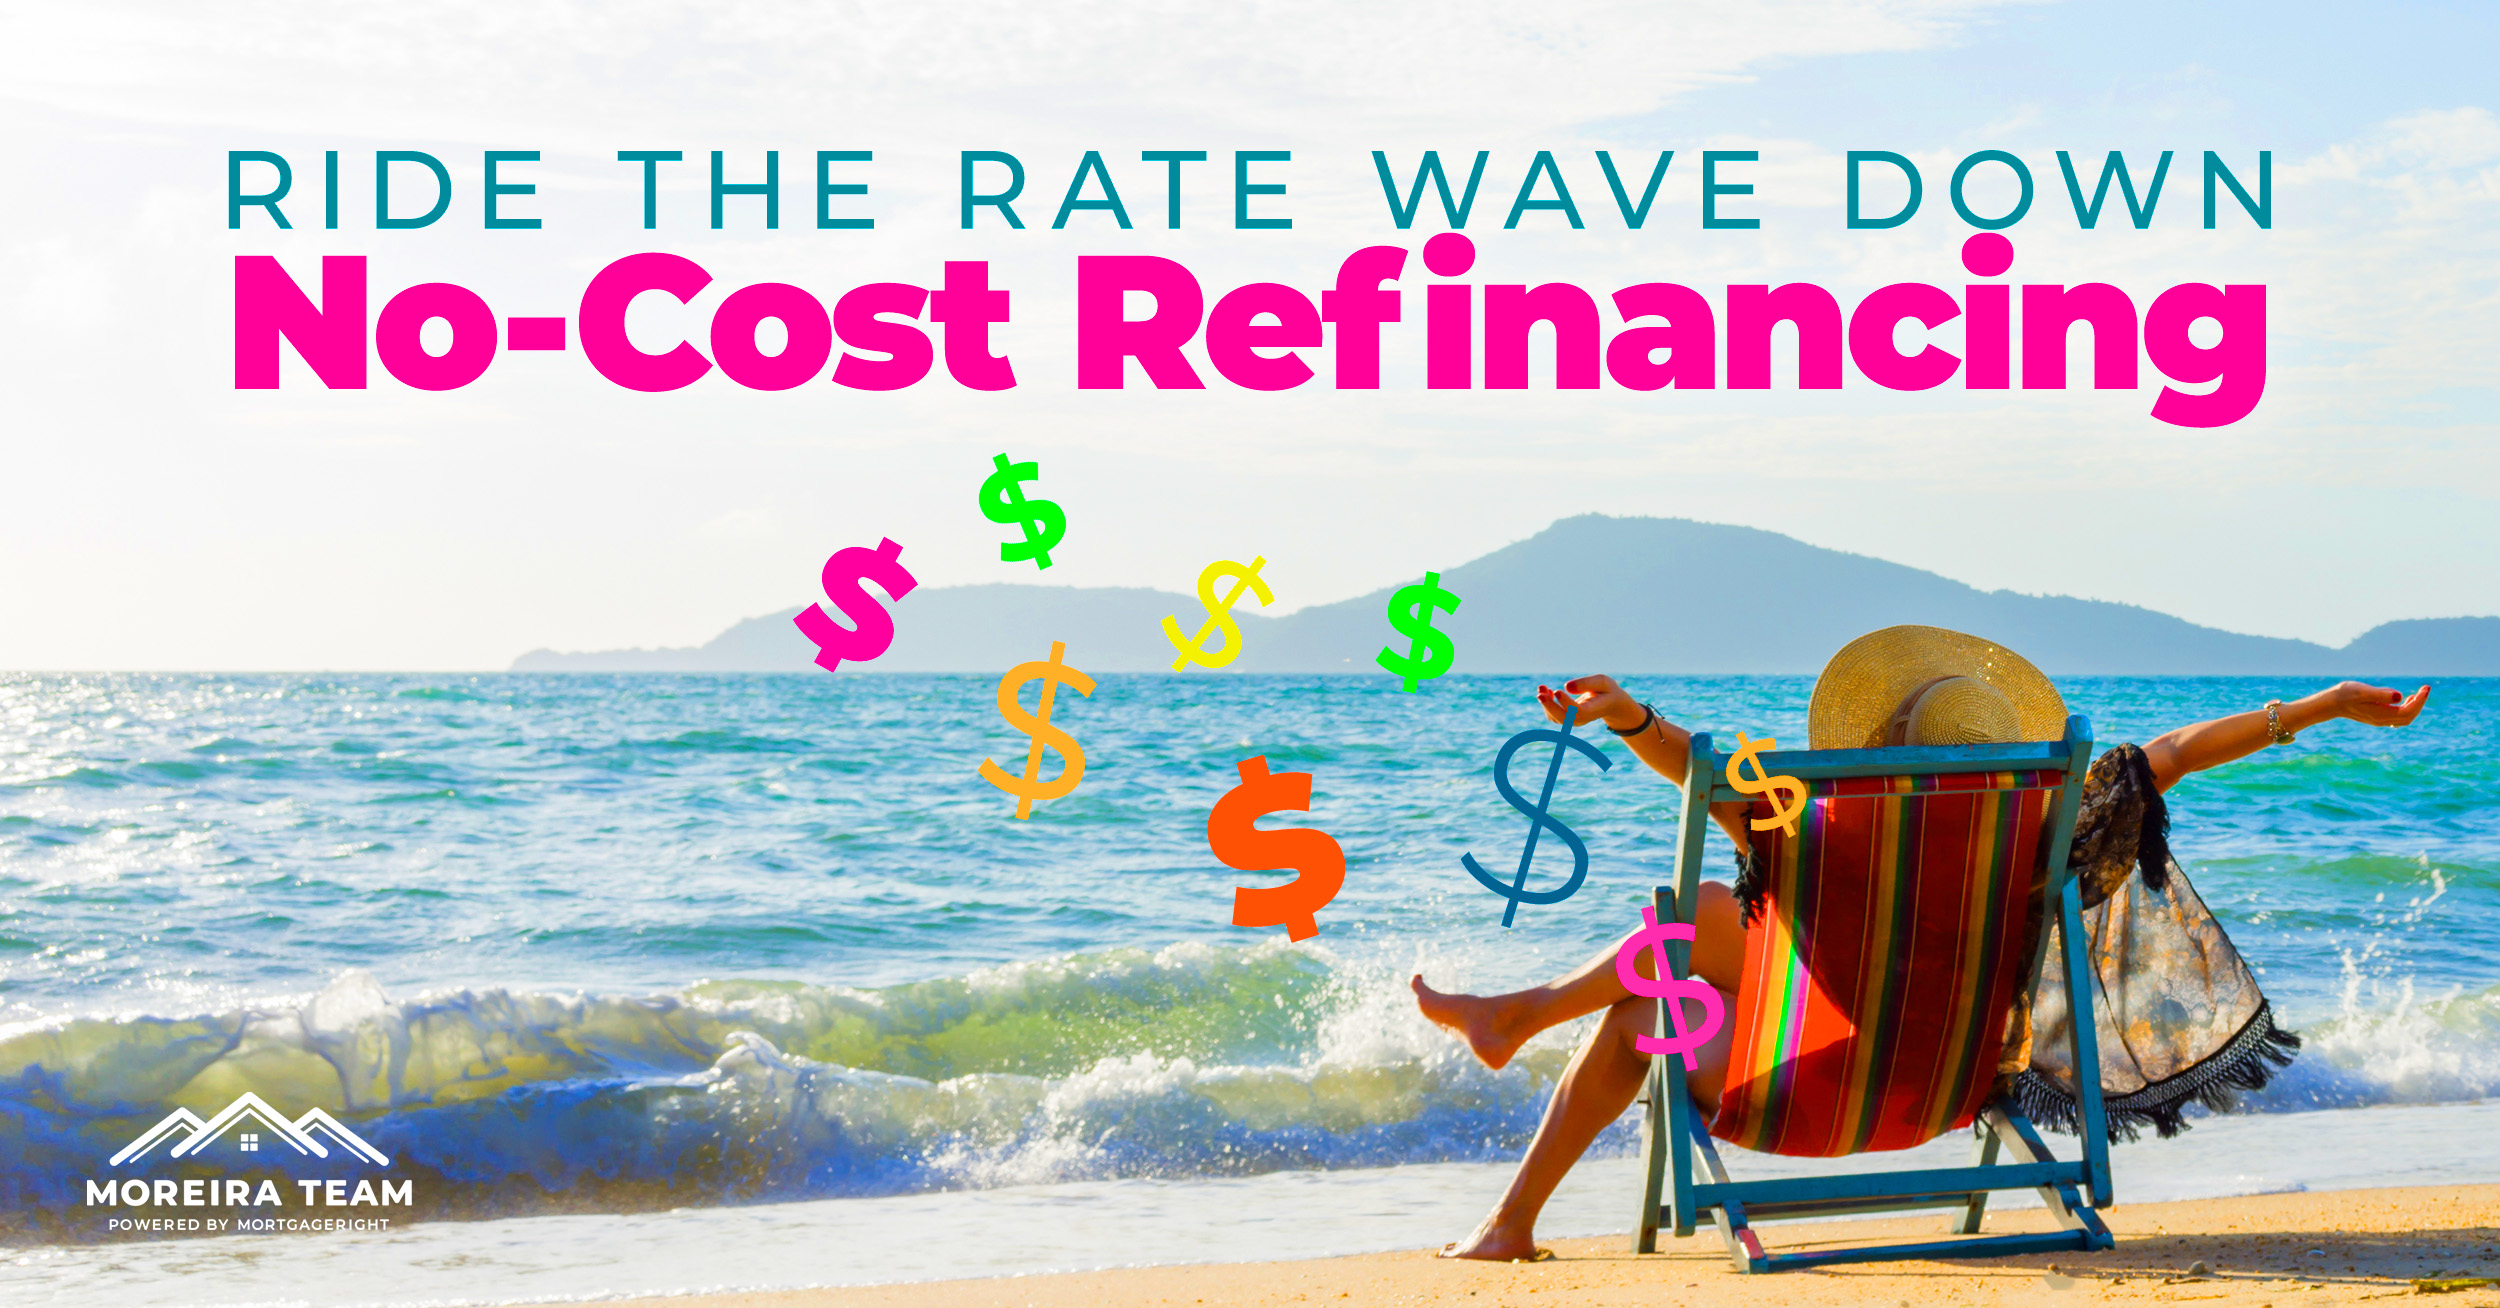 no cost refoinance - ride the rate down